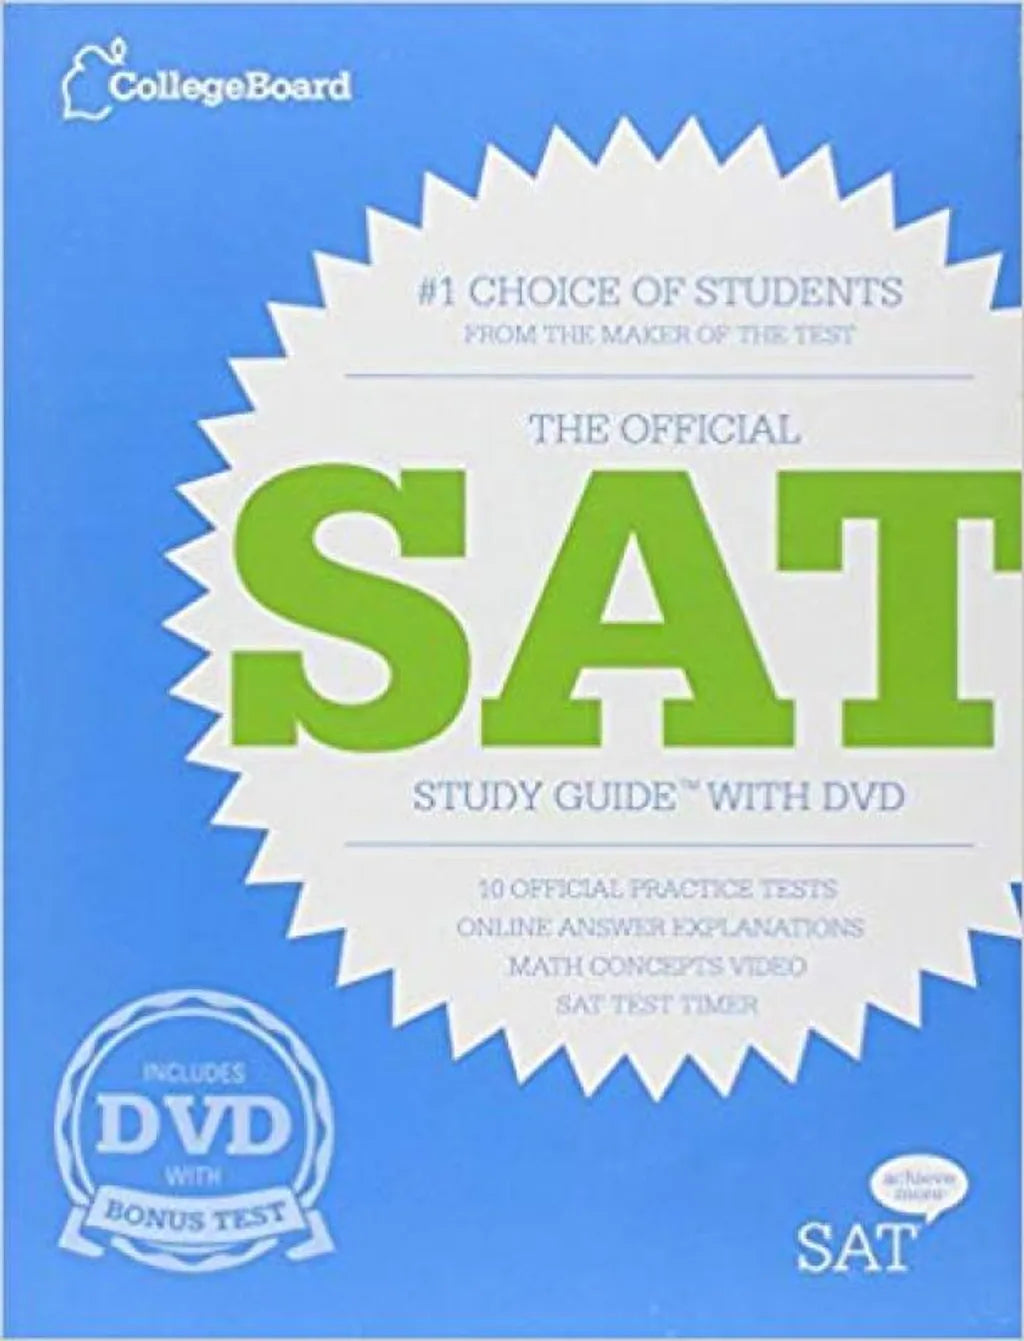 THE OFFICIAL SAT STUDY GUIDE WITH DVD Loja Skeelo